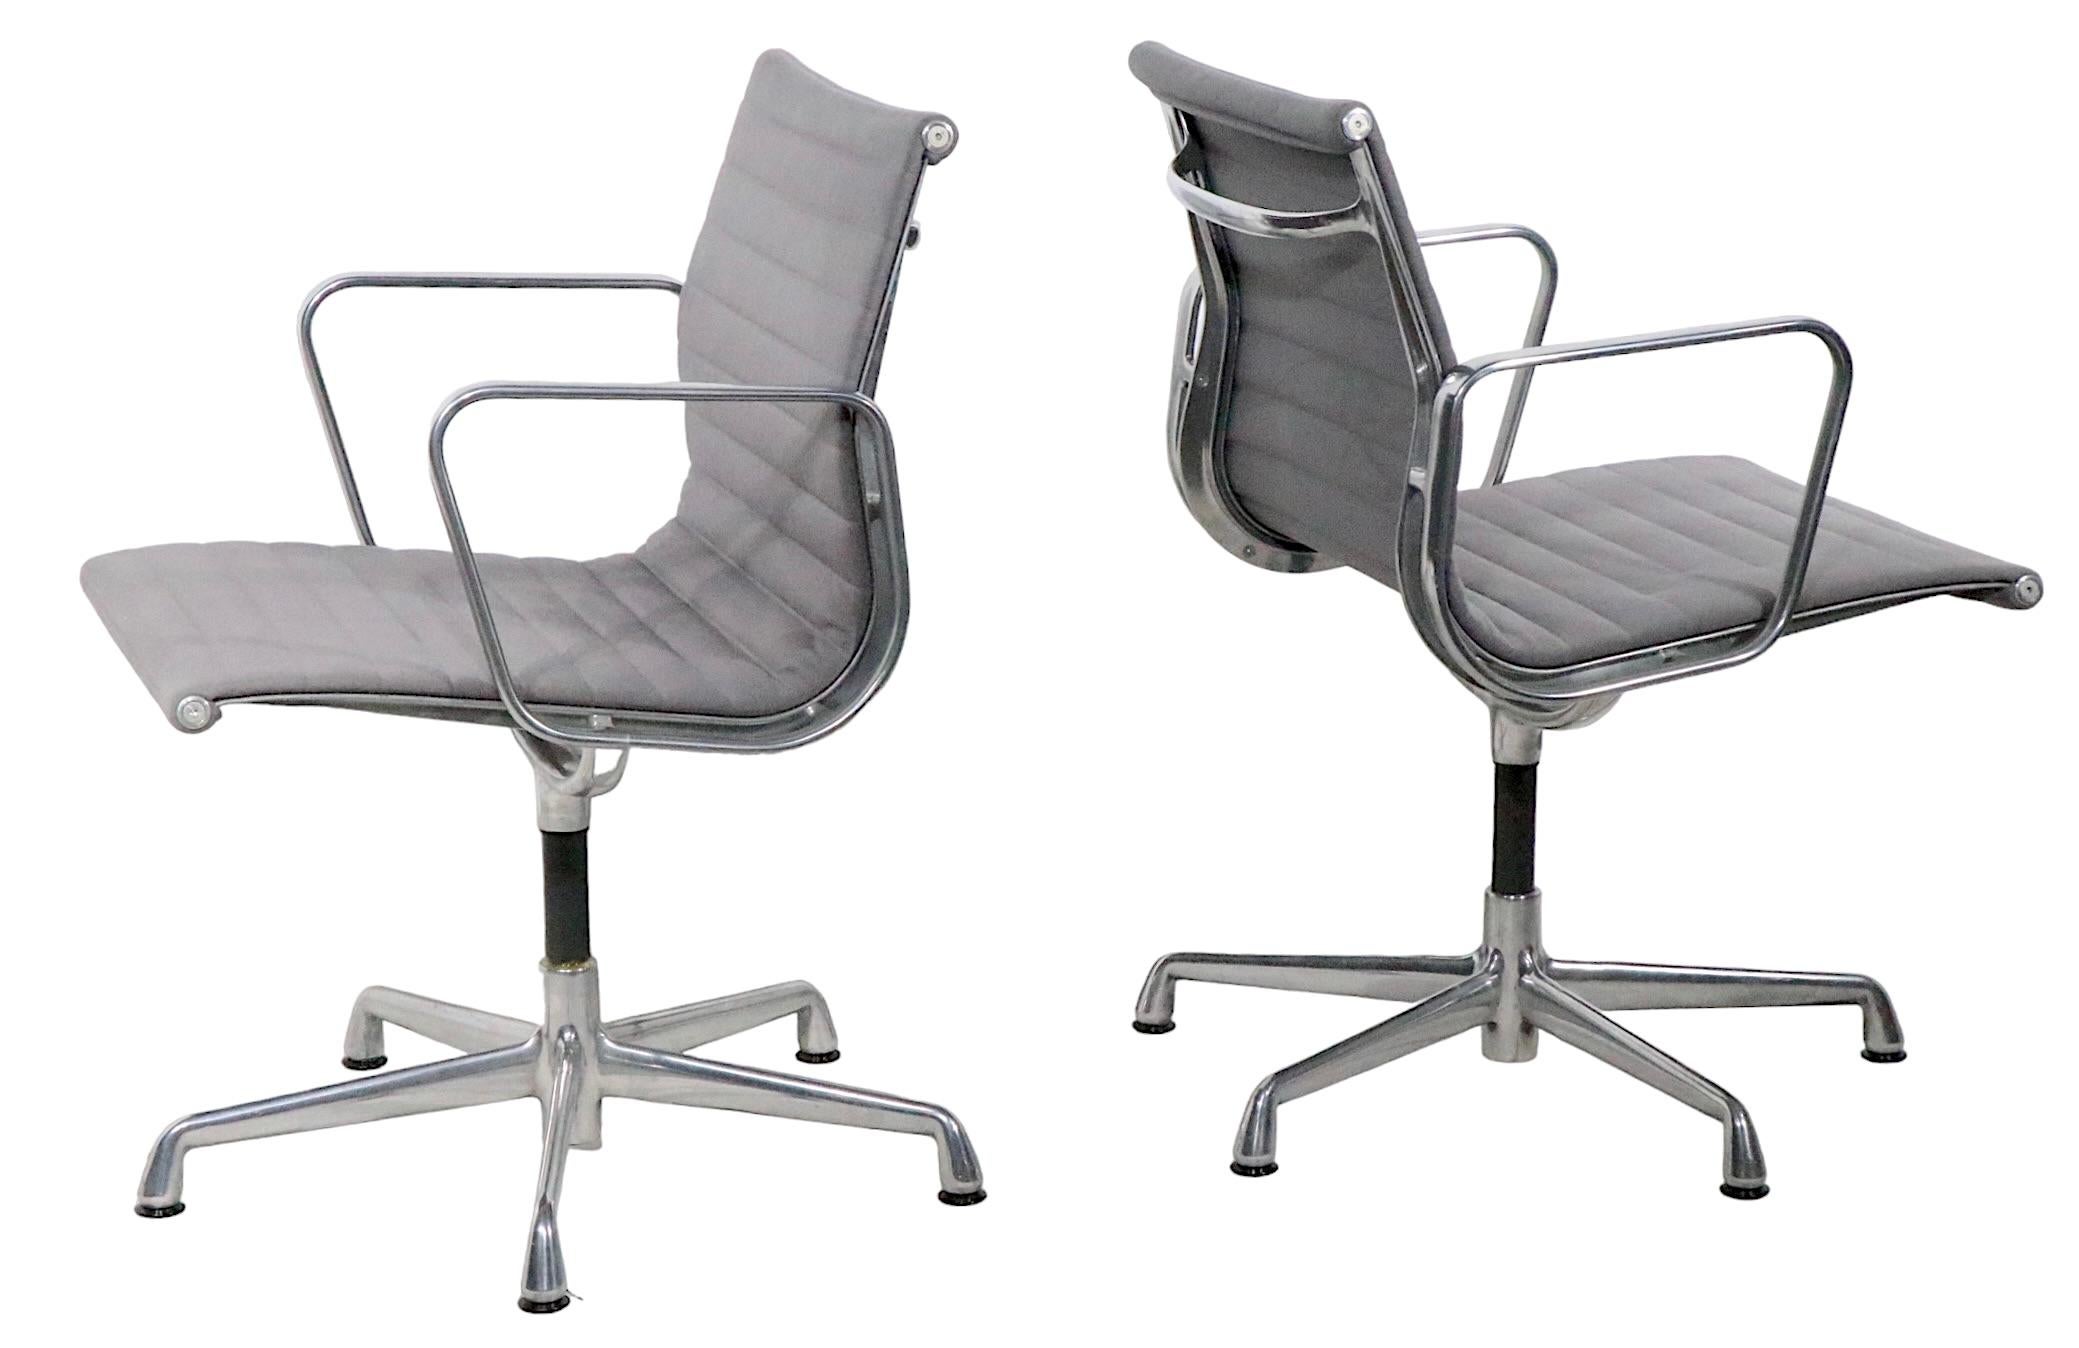 Eames Management Chairs in Grey Fabric Upholstery c. 1980 - 1990s 4 Available  For Sale 2